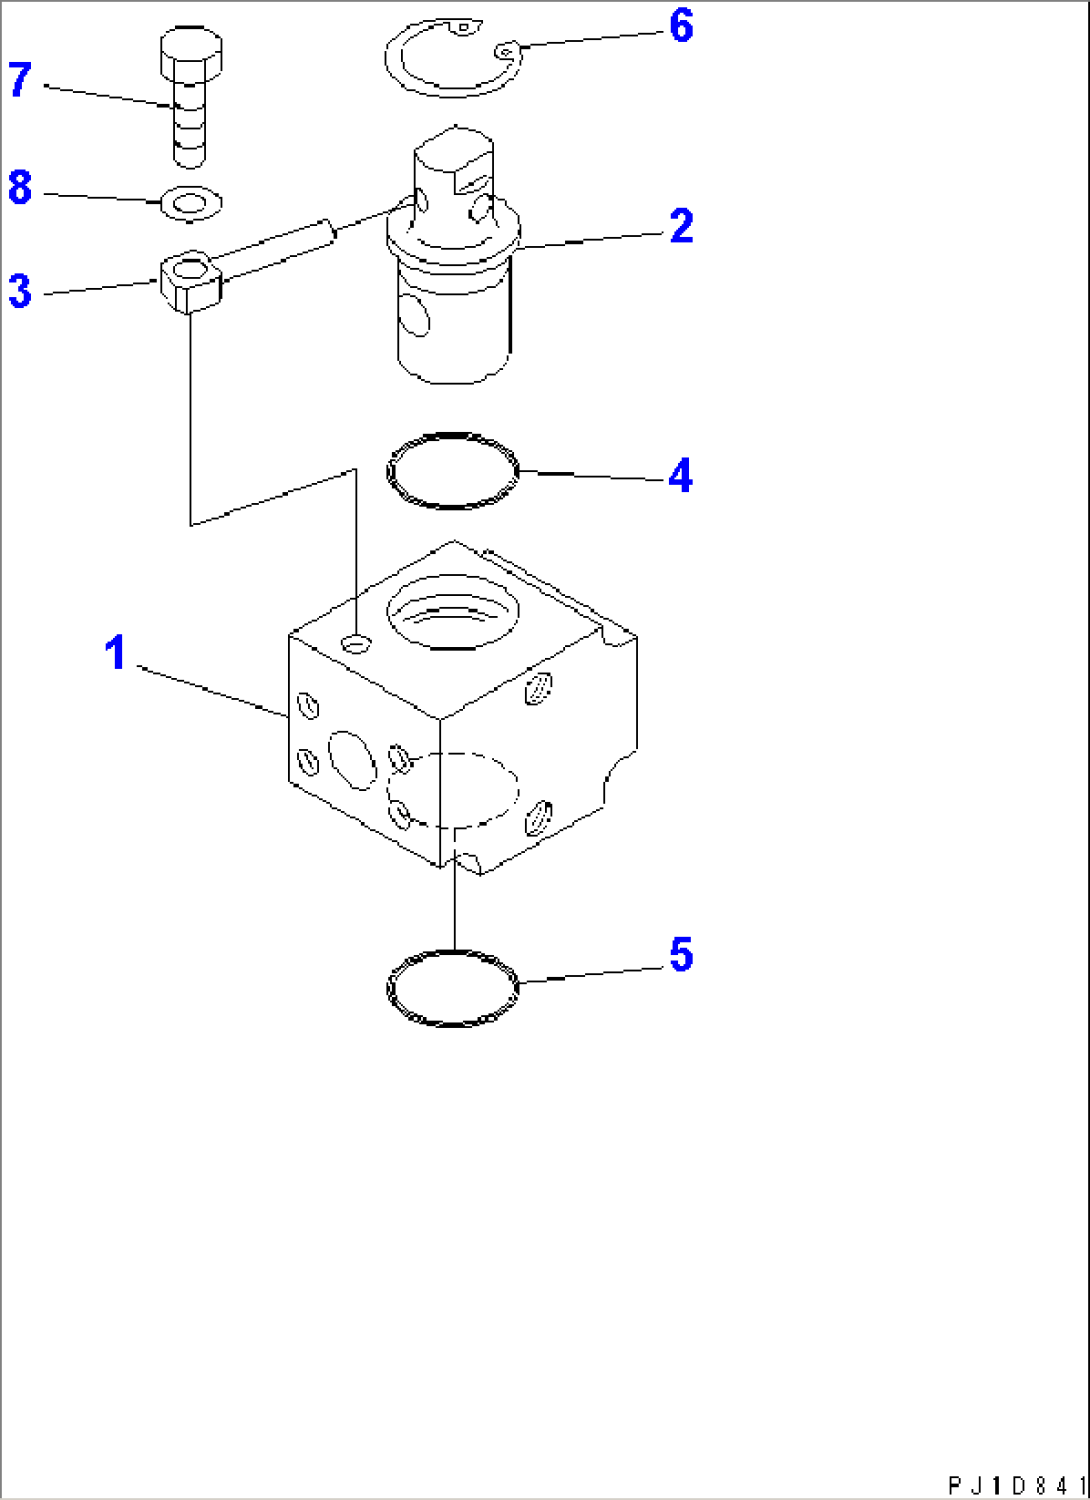 STOP VALVE (FOR ADDITIONAL PIPING)(#10160-)